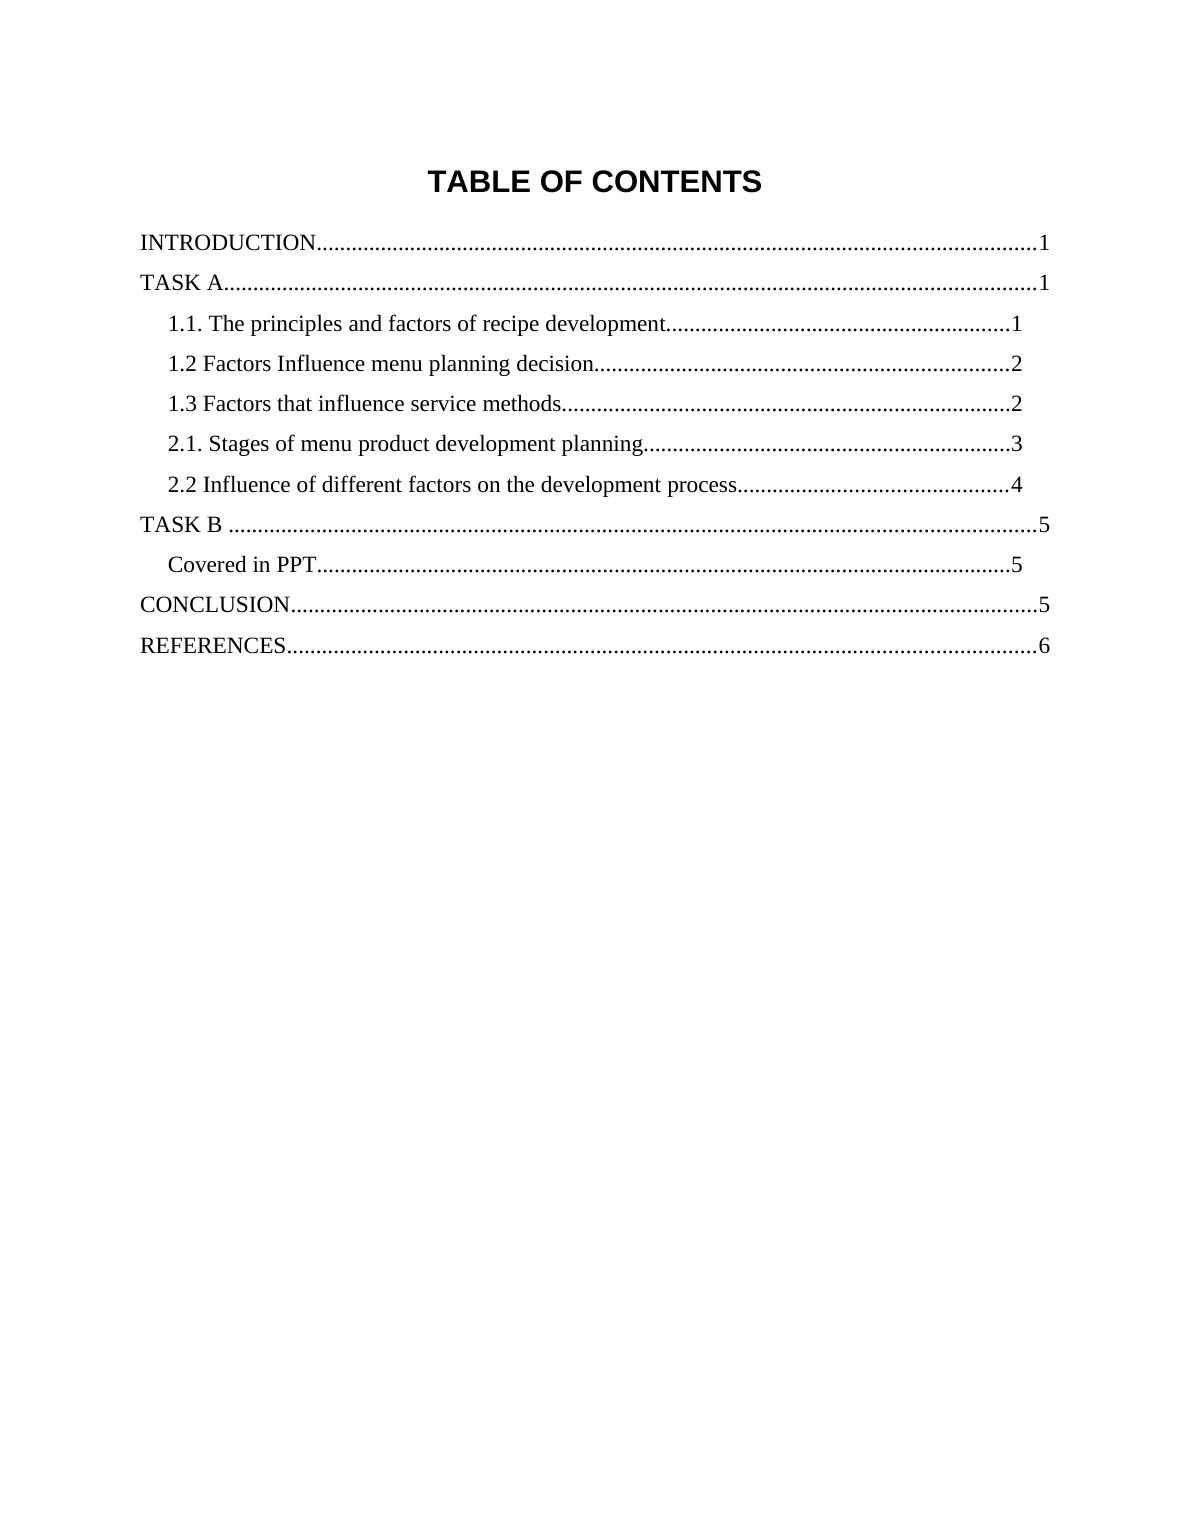 Menu Planning & Product Development TABLE OF CONTENTS_2